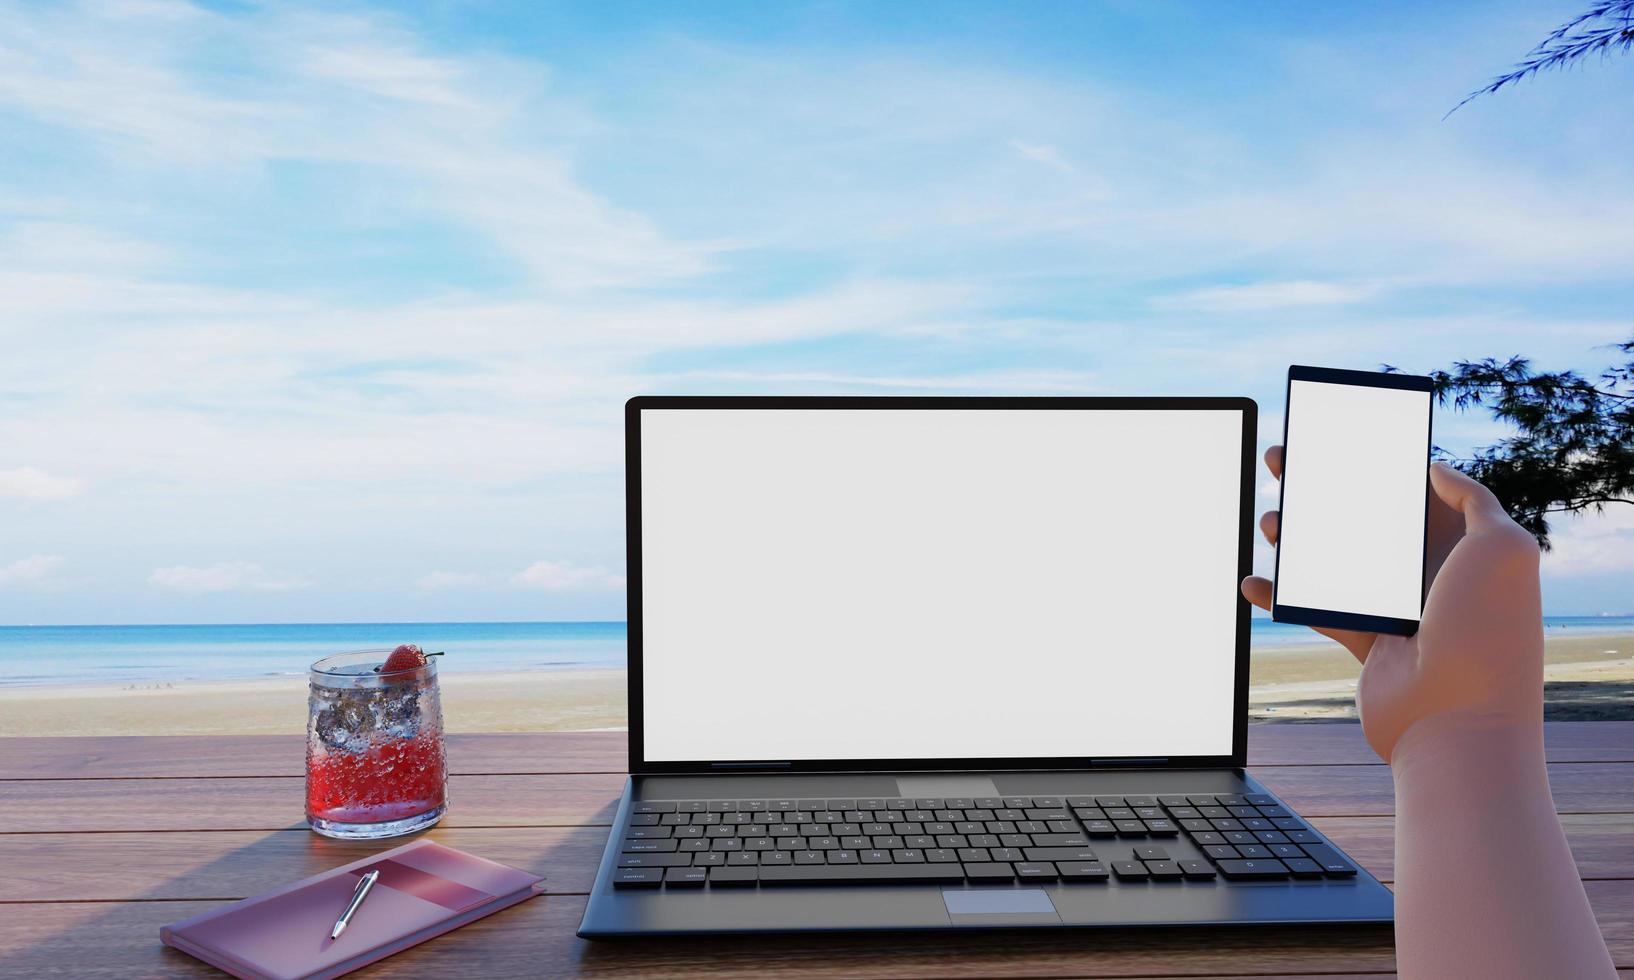 A computer or laptop placed on a wooden table, a smartphone in the hands of a person. The screen is blank white. Sea and beach background. Work Out, Beach Vacation, 3D Rendering photo